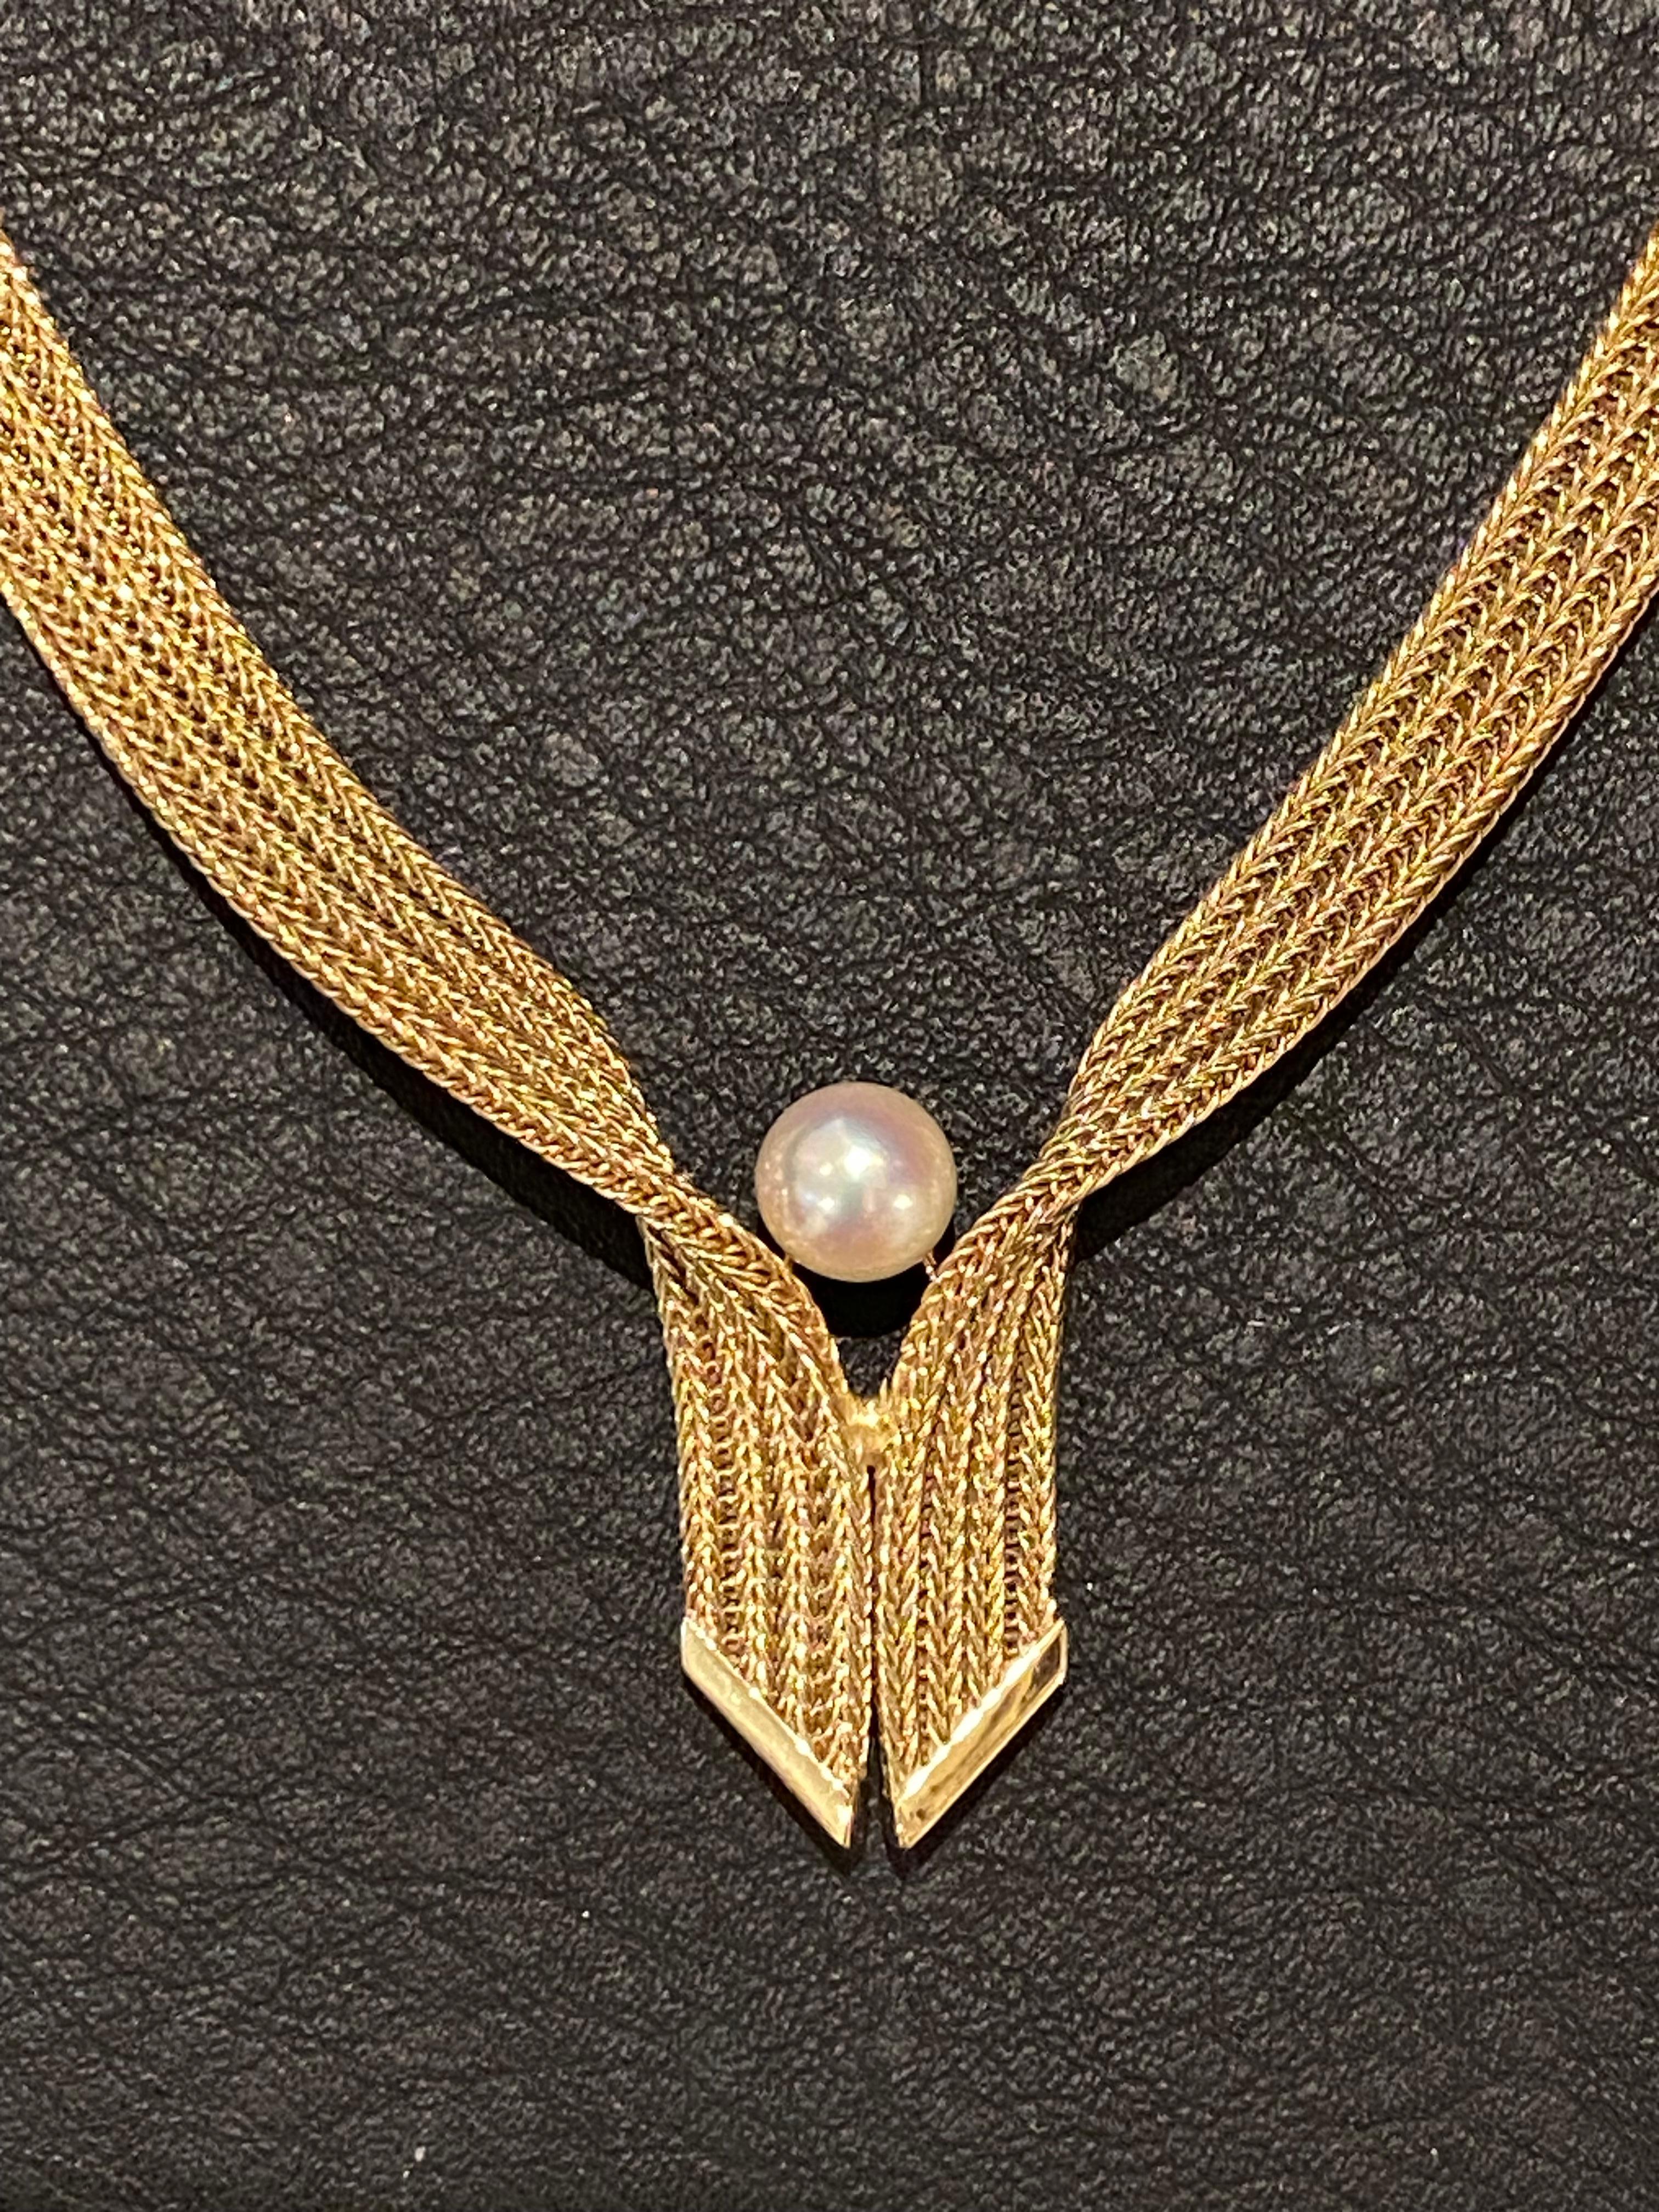 Grossé Germany 14K Yellow Gold & 10mm South Sea Pearl Retro Necklace, c1963 For Sale 1